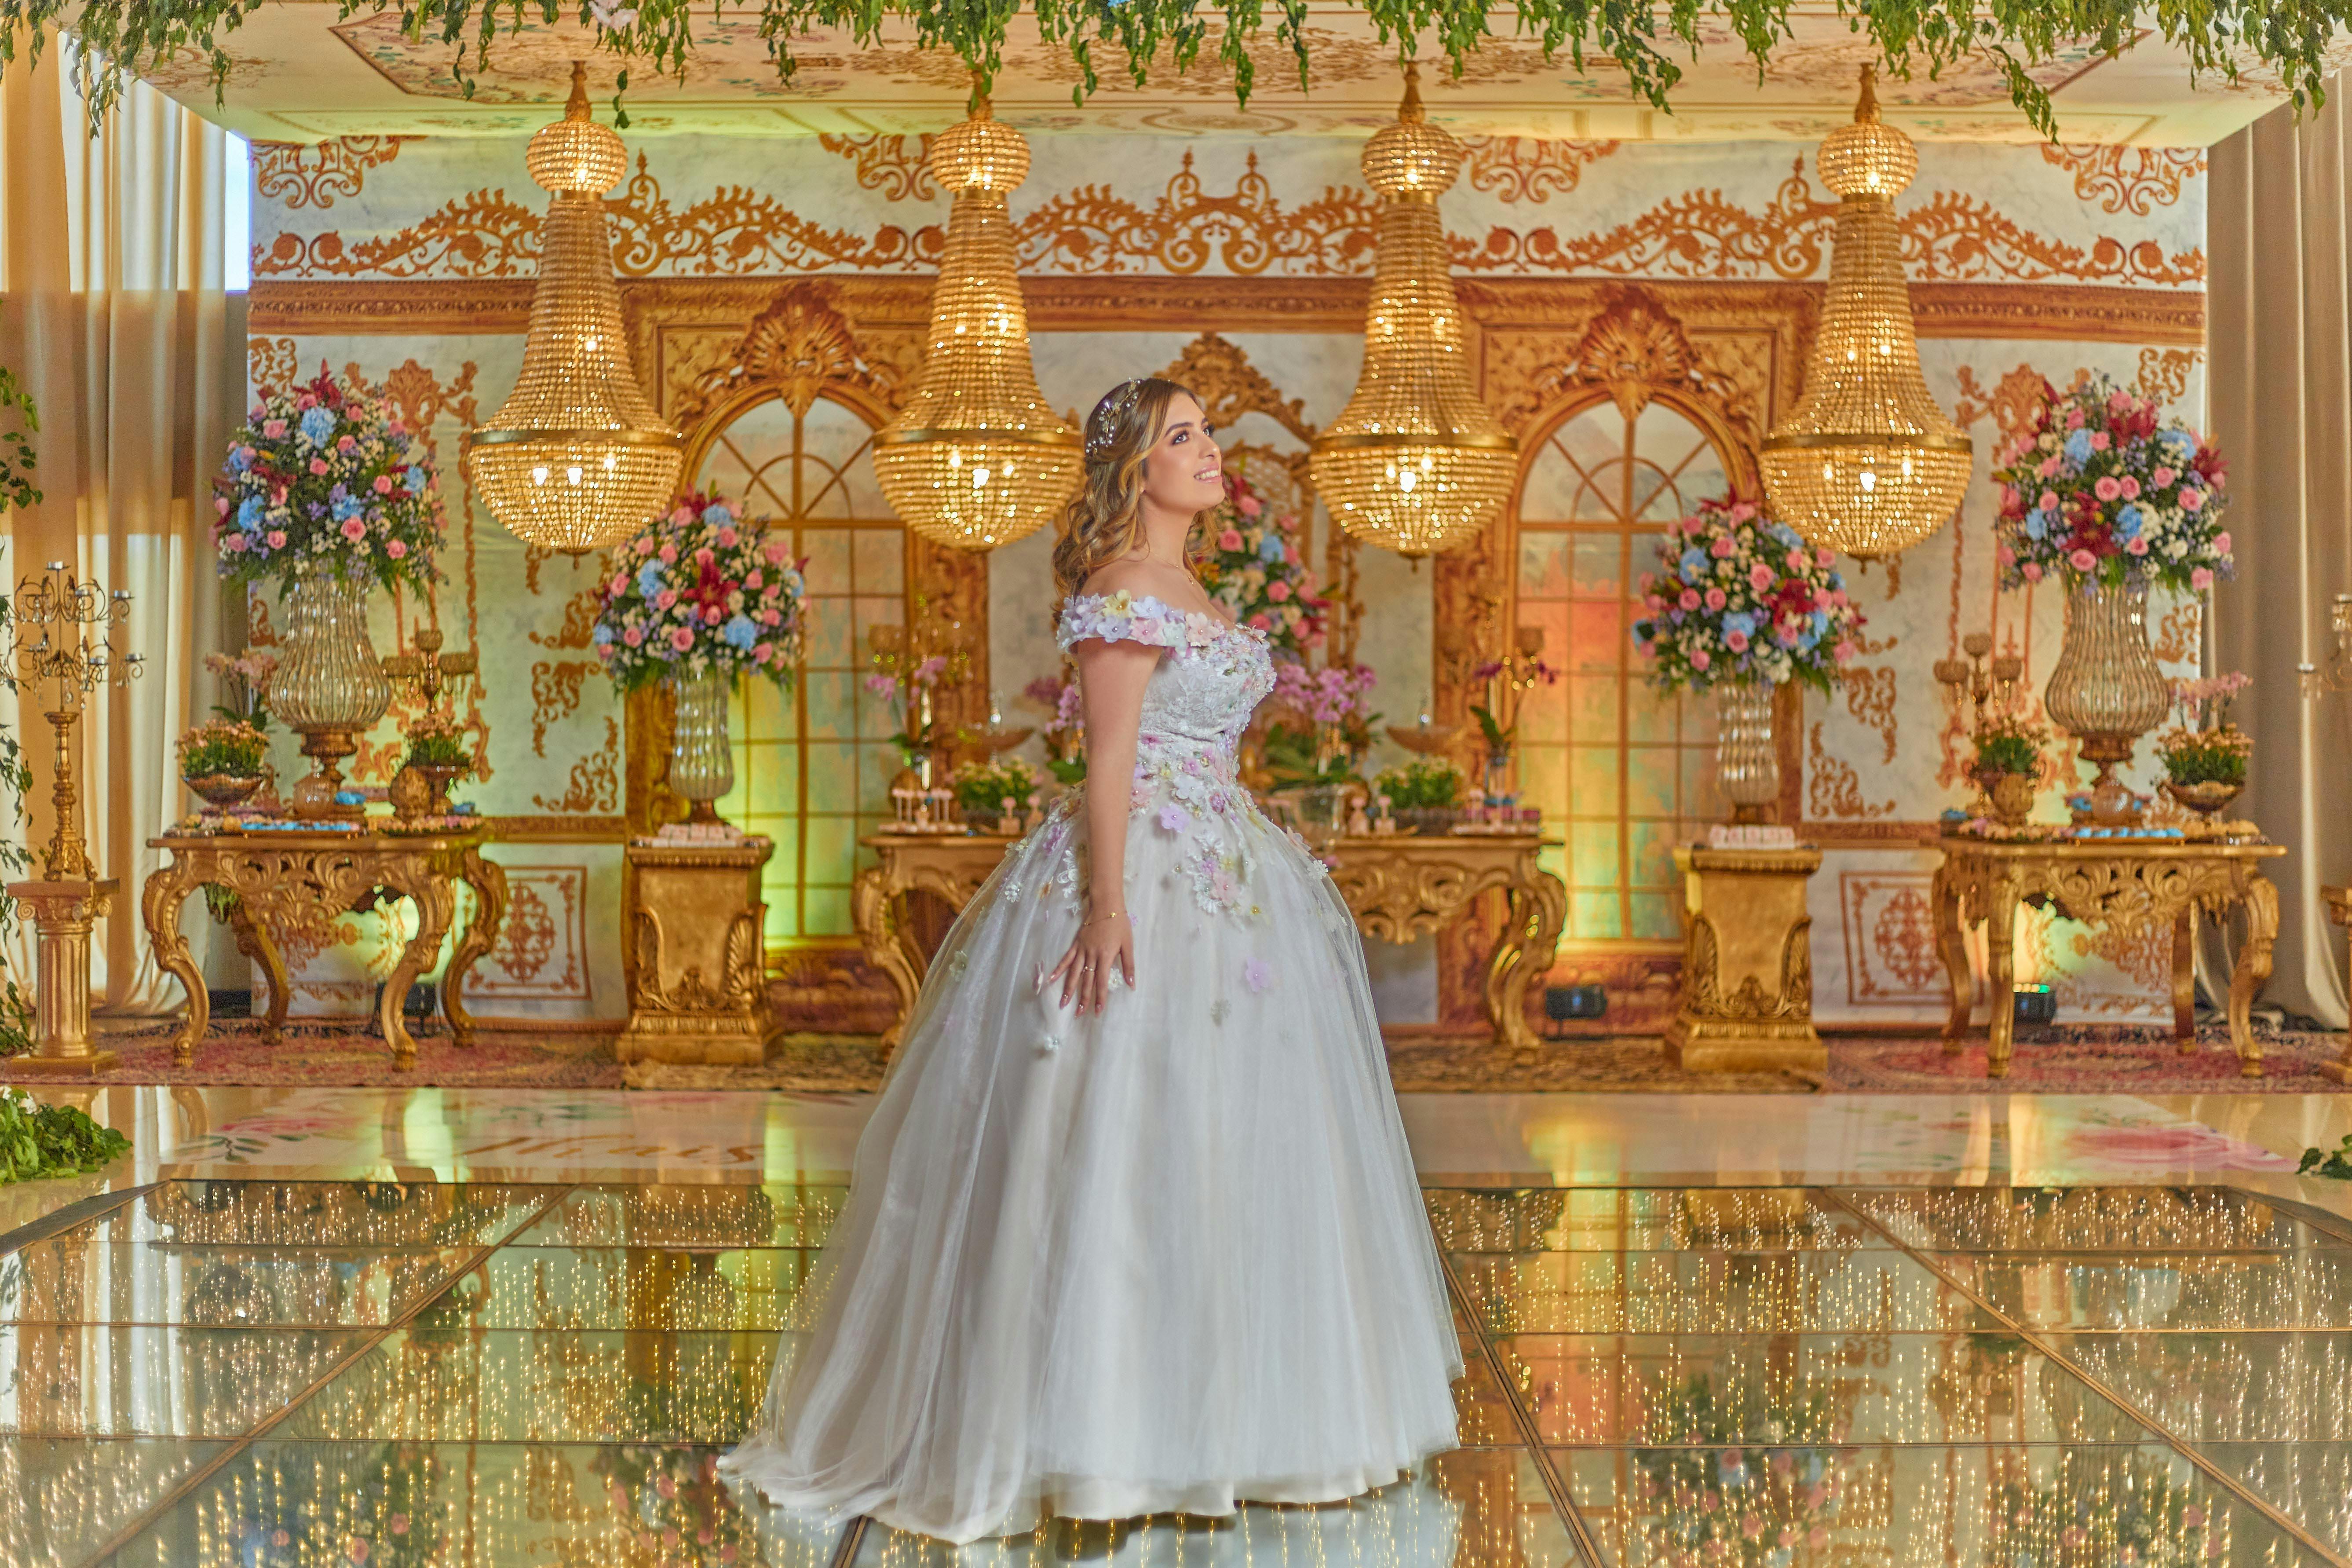 a woman wearing a white gown inside a room decorated with flowers